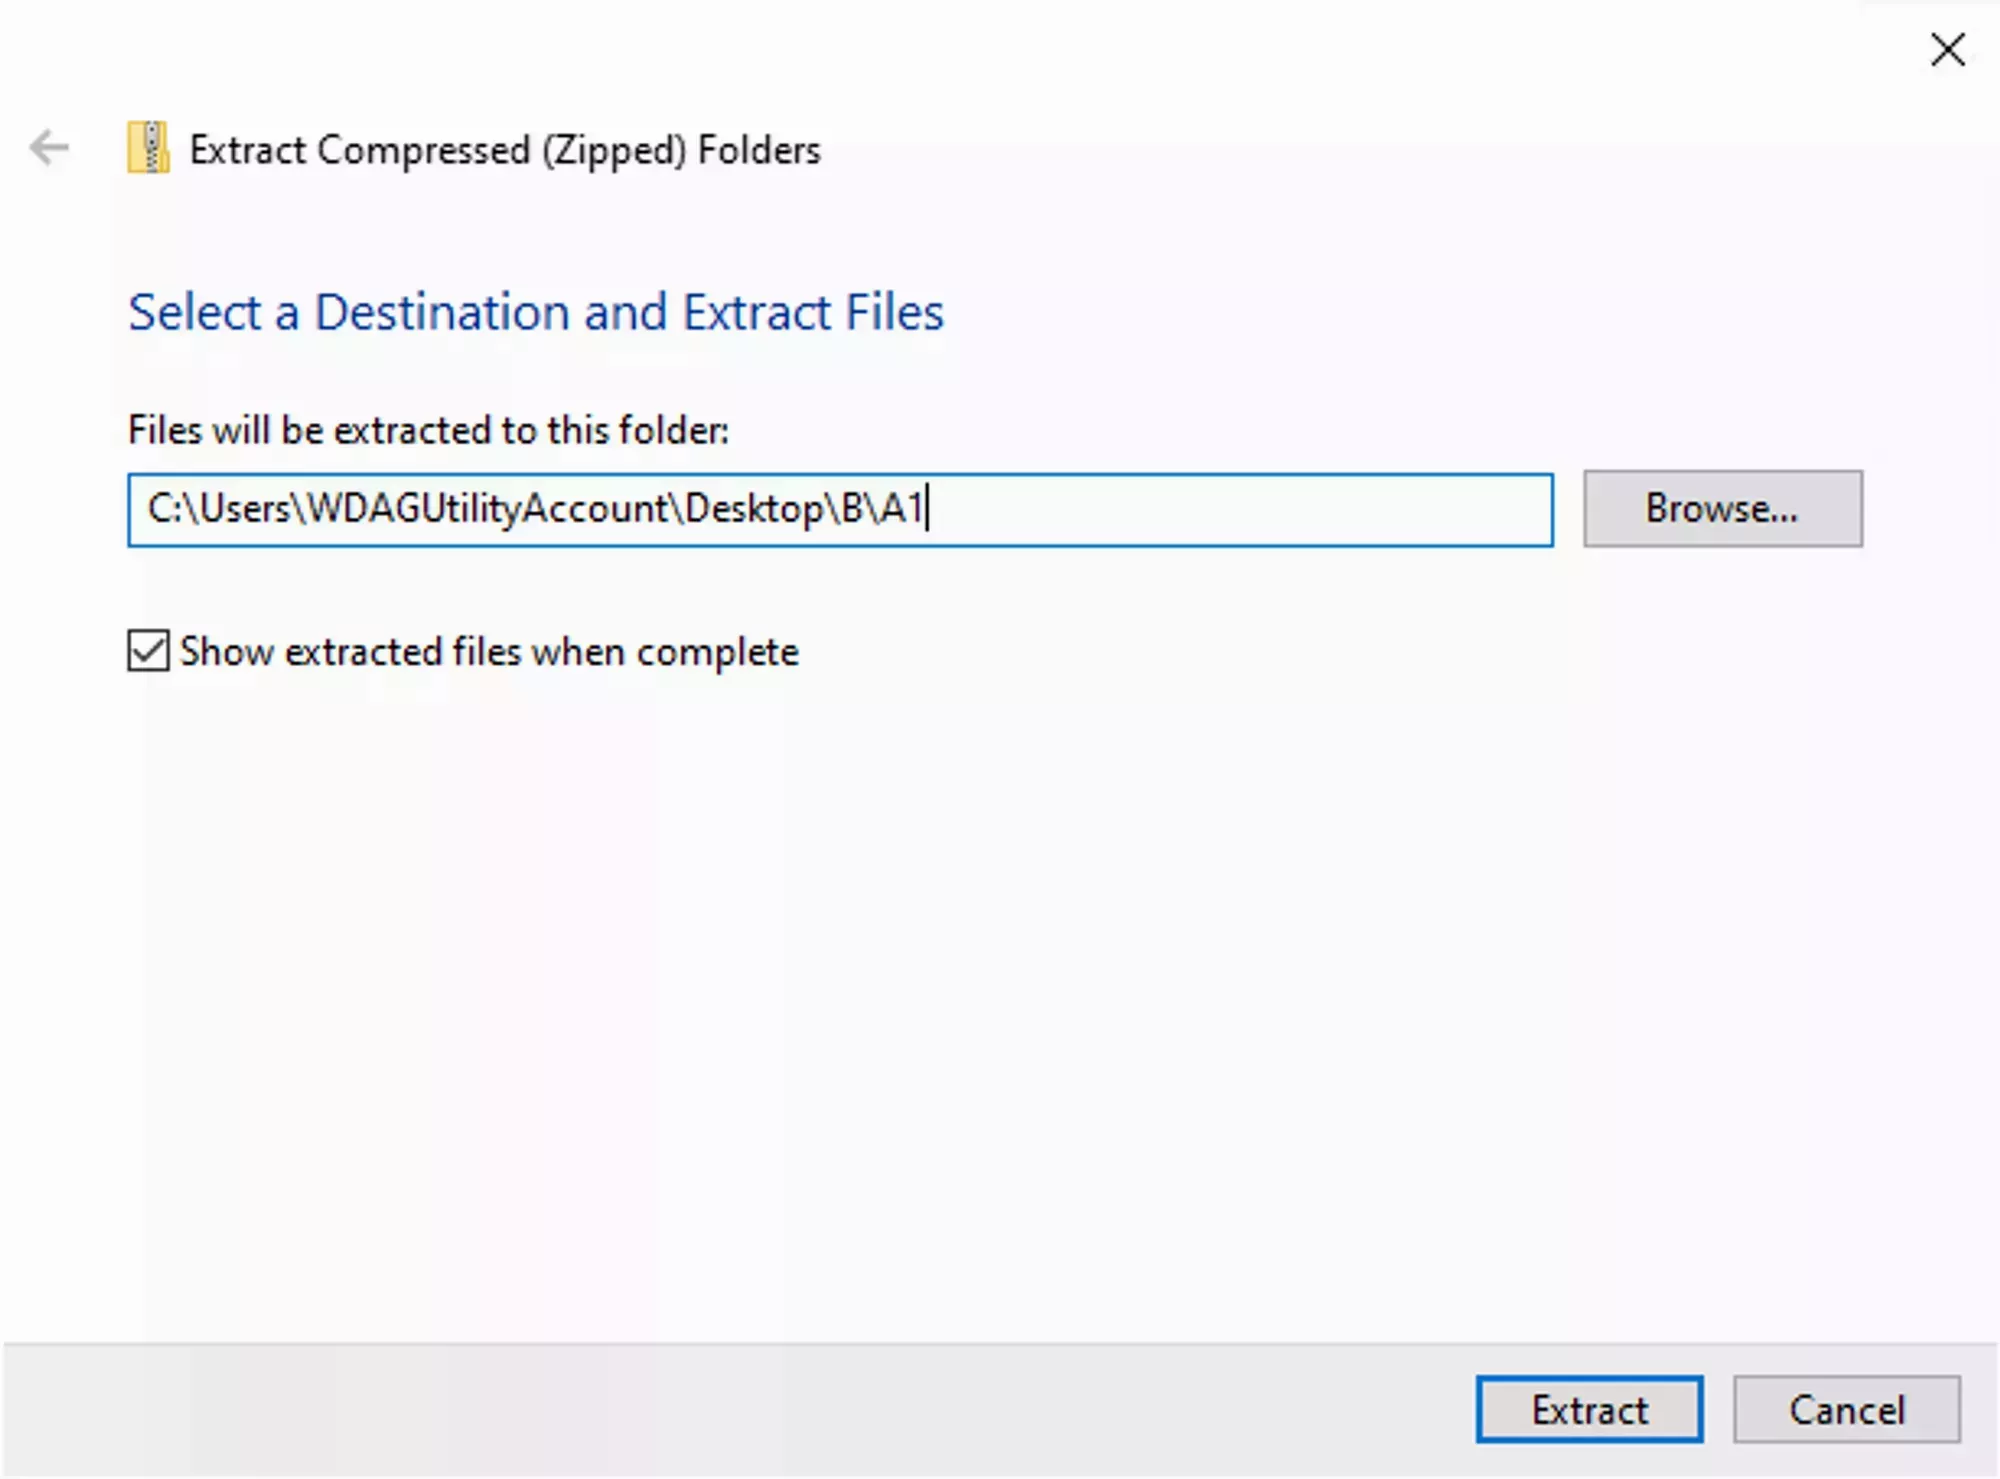 The destination select step for the Extract Compressed Folders wizard with the &quot;Files will be extracted to this folder&quot; field located in the middle of the window and the &quot;extract&quot; button in the bottom right hand corner